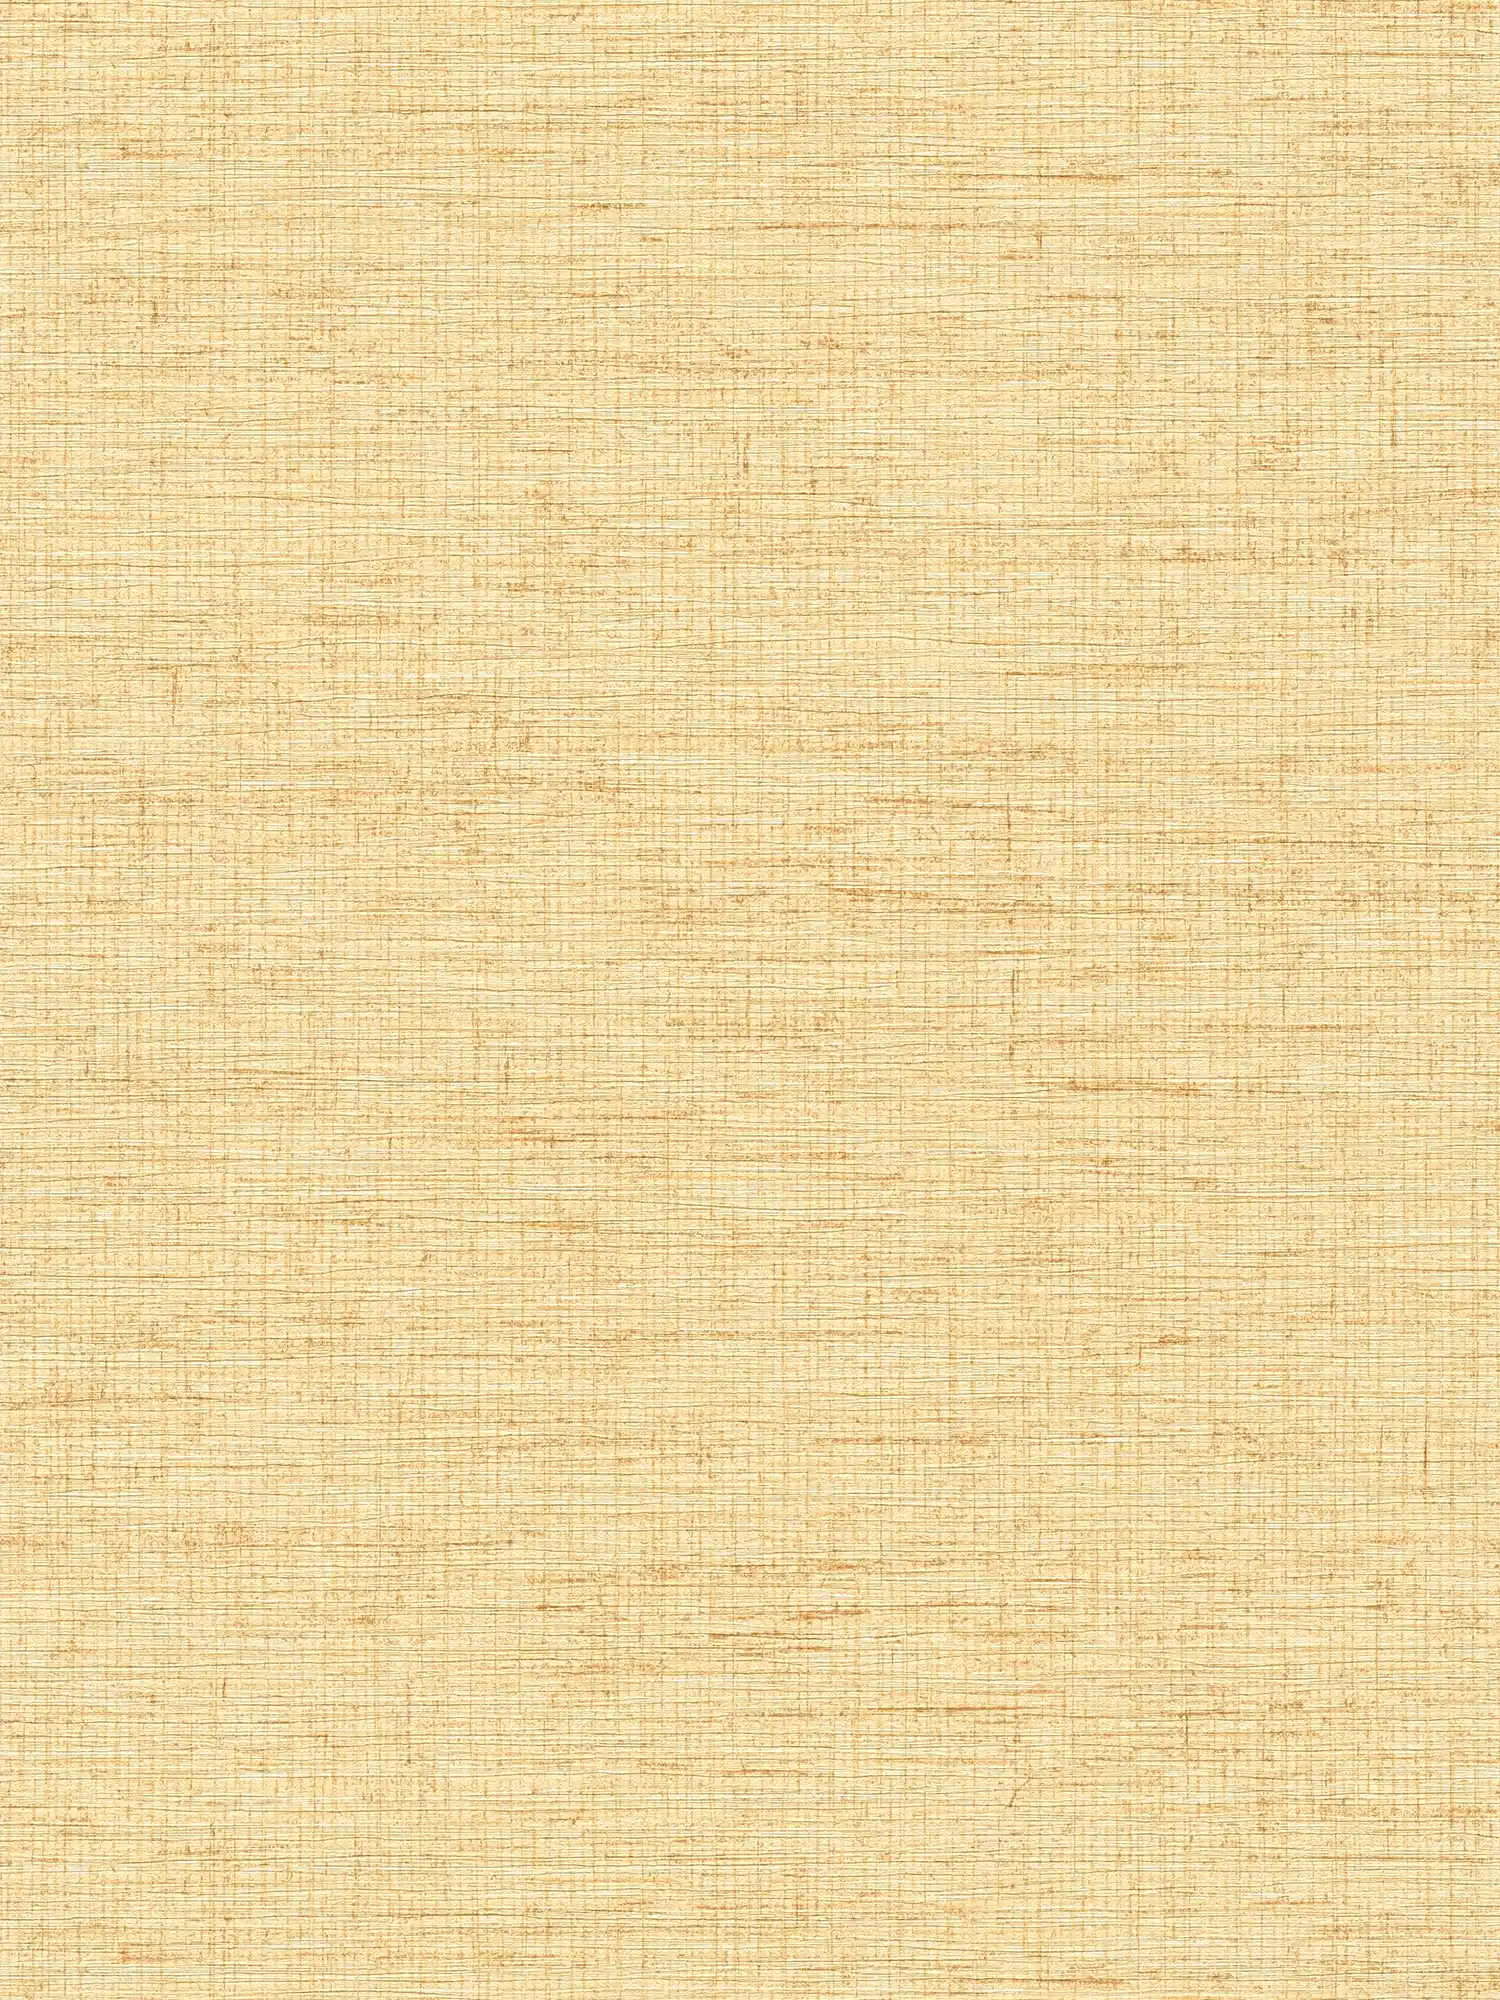 Yellow wallpaper with raffia fabric pattern in ethnic style
